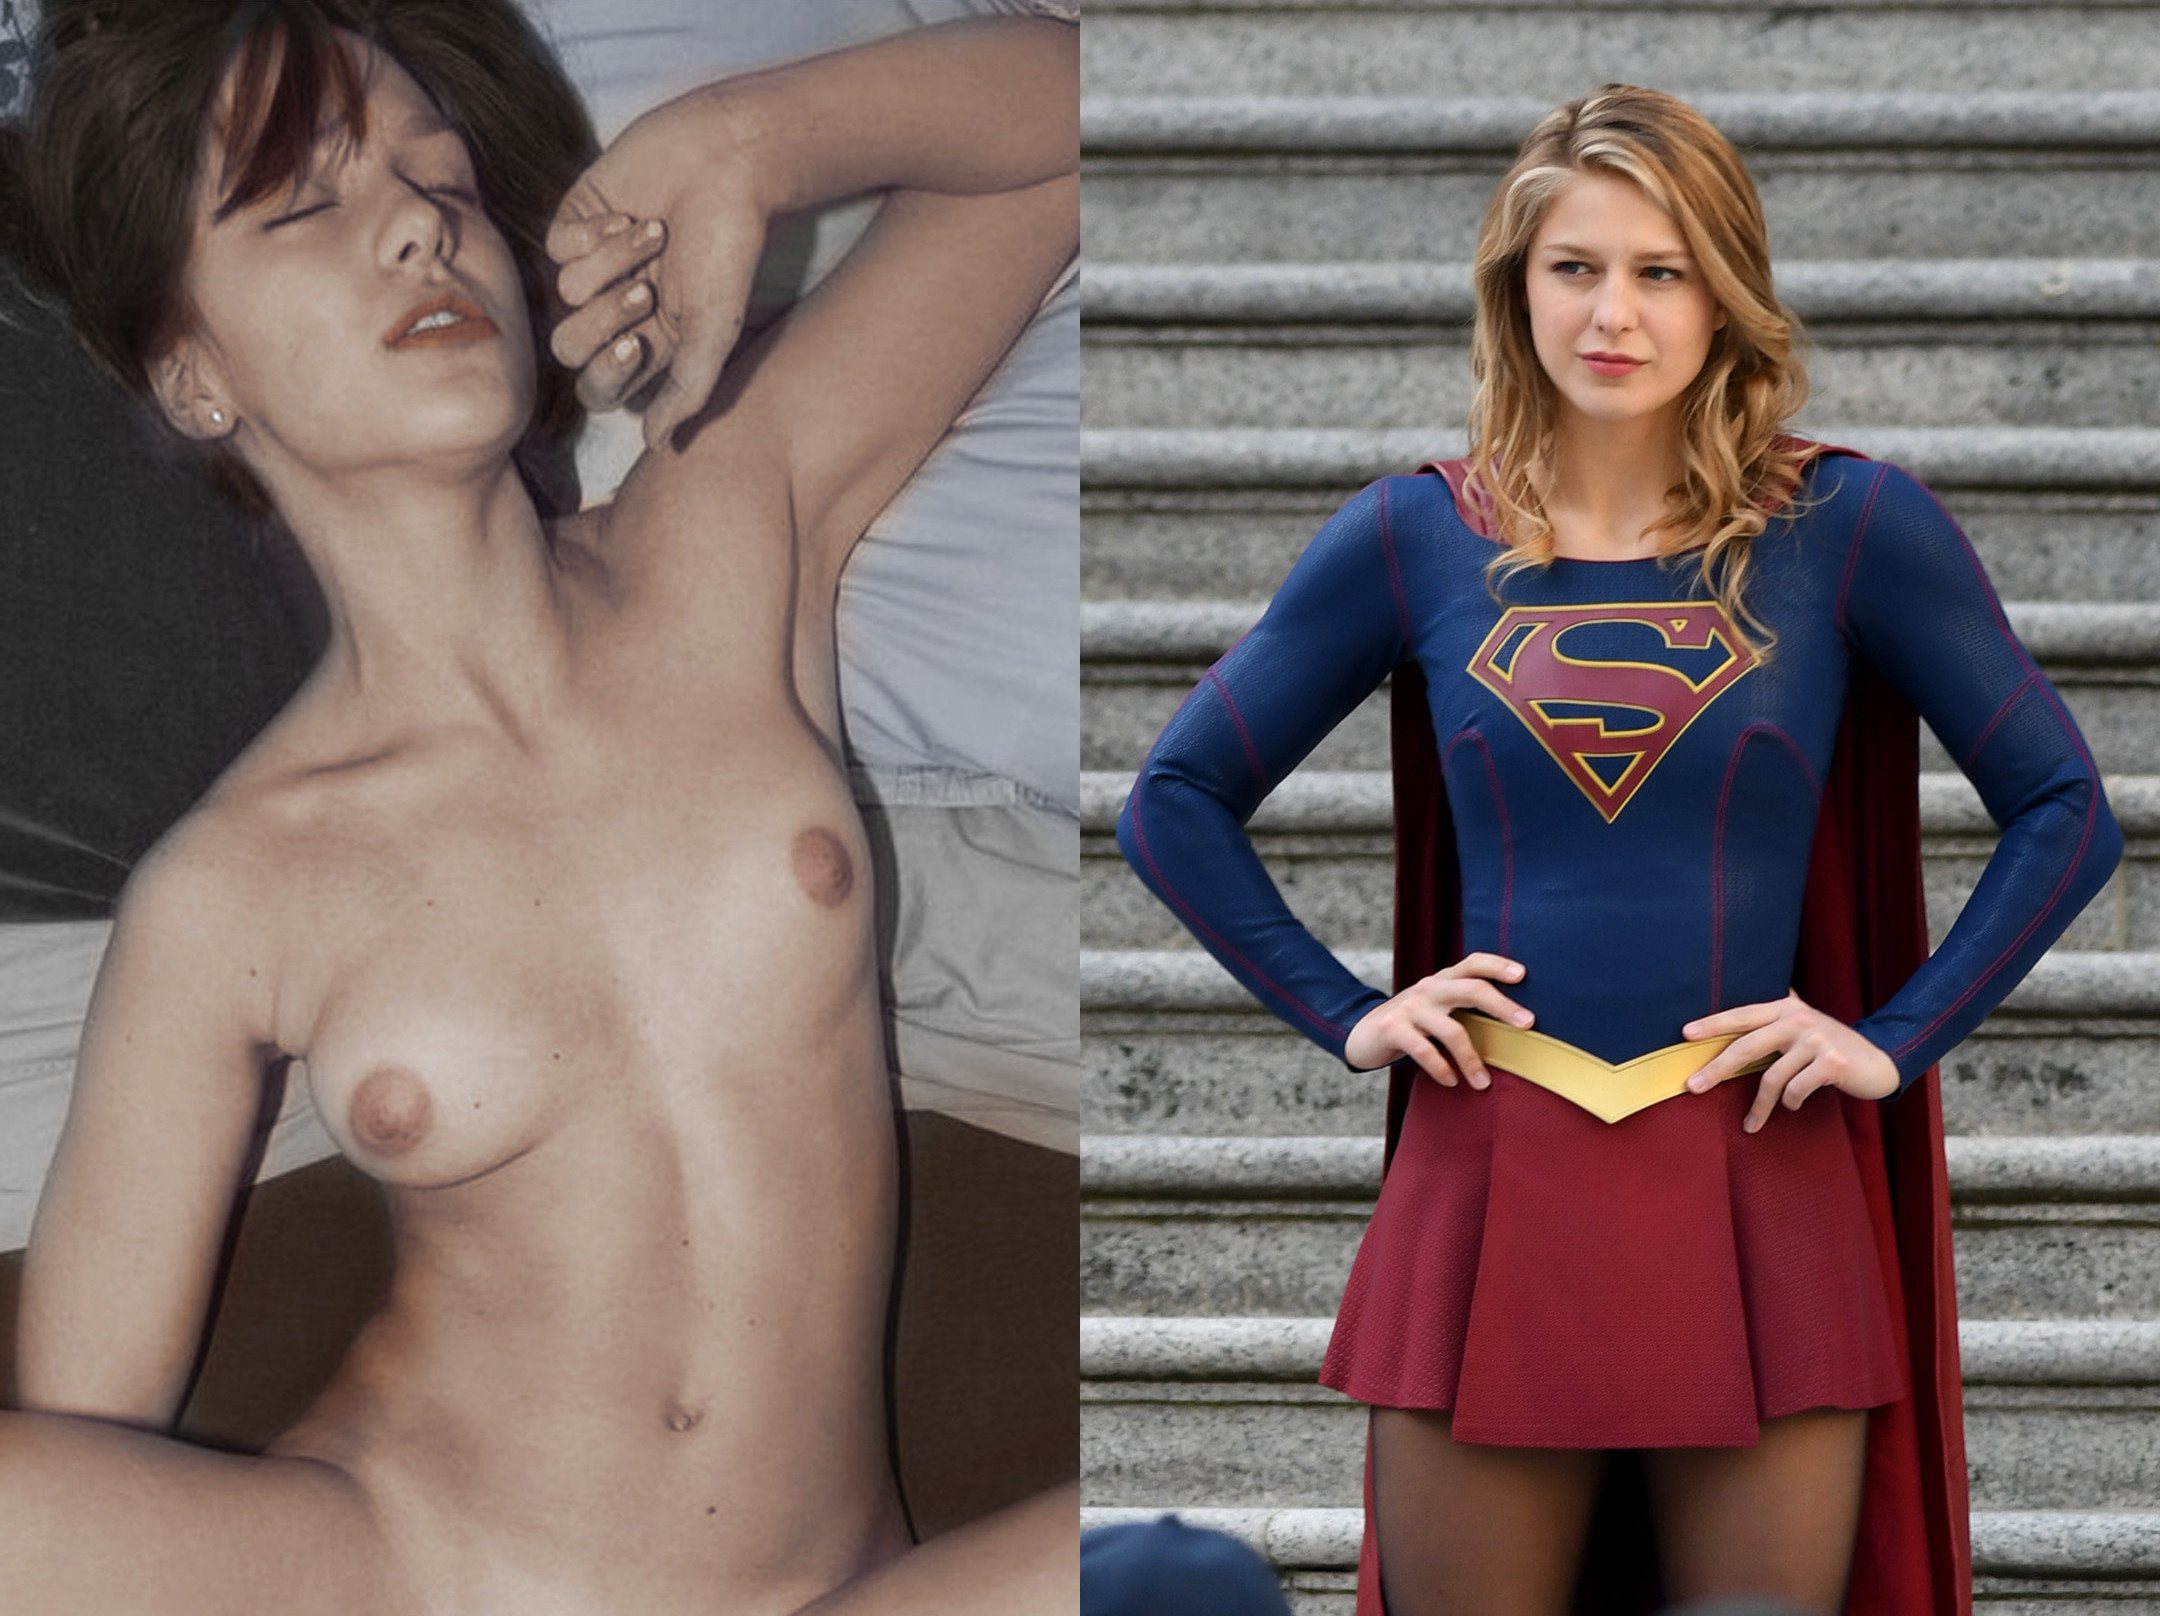 Sexy supergirl alicia gets naked and plays